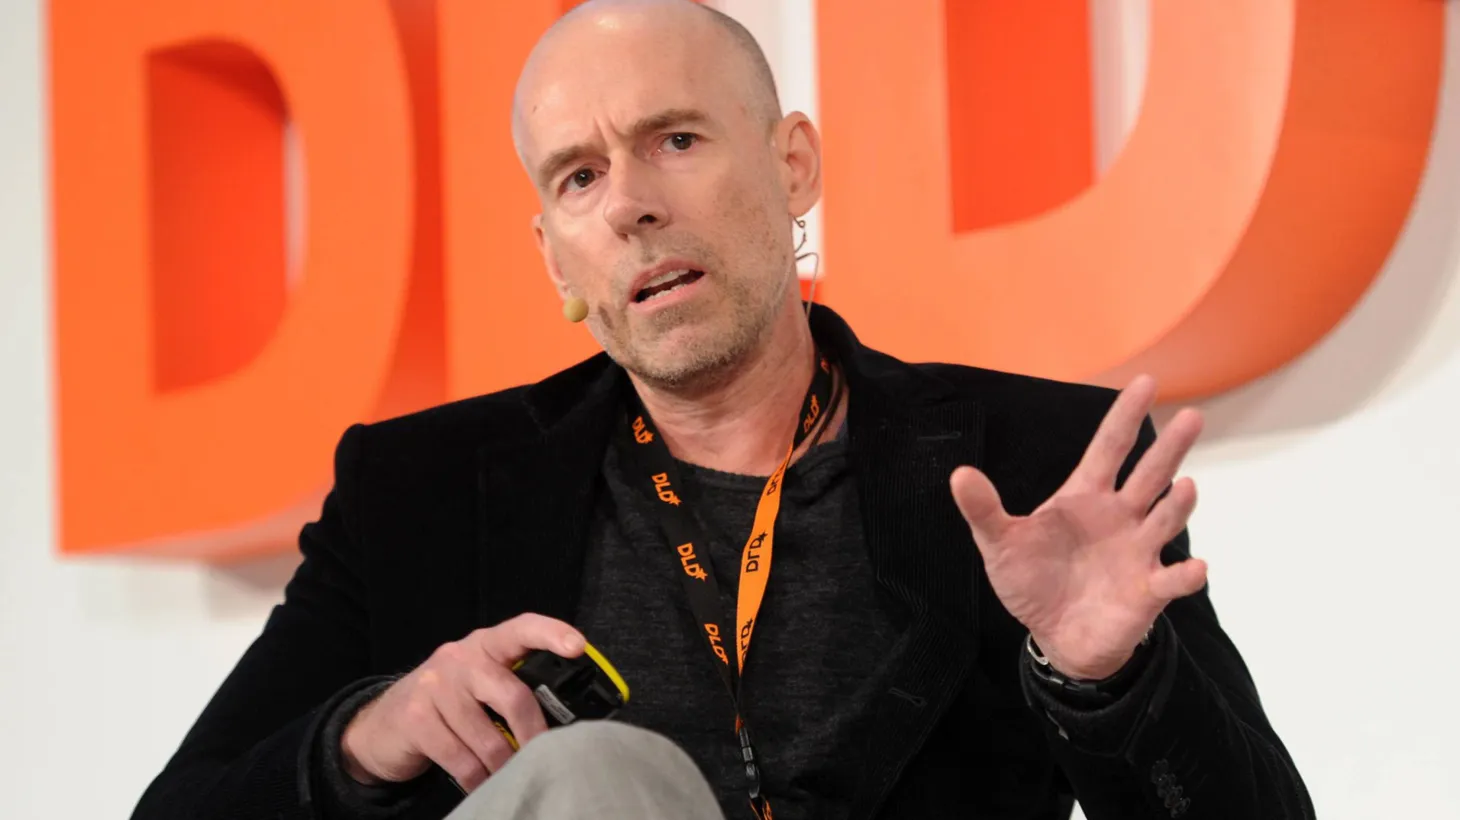 Scott Galloway speaks during the DLD Conference at the HVB Forum in Munich, Germany, on January 22, 2013.